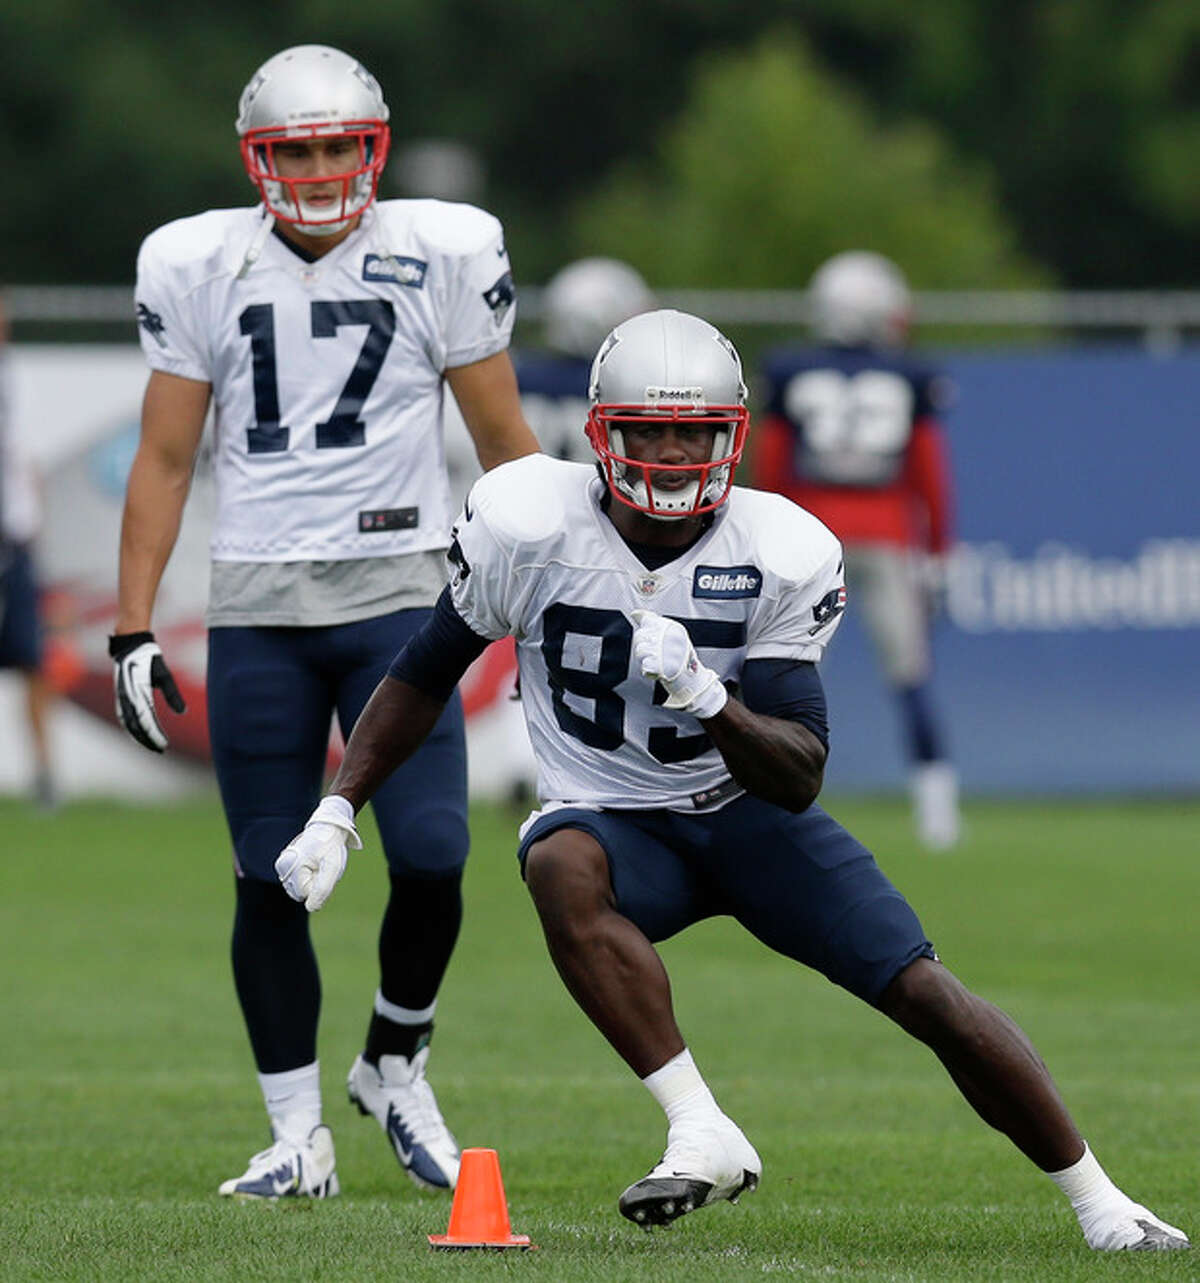 New England Patriots wide receiver Brandon Lloyd (85) cuts as wide receiver Greg Salas (17) watches during a practice drill at Gillette Stadium in Foxborough, Mass. Wednesday, Sept. 5, 2012. The Patriots are preparing for their NFL football season opener against the Tennessee Titans on Sunday. (AP Photo/Elise Amendola)